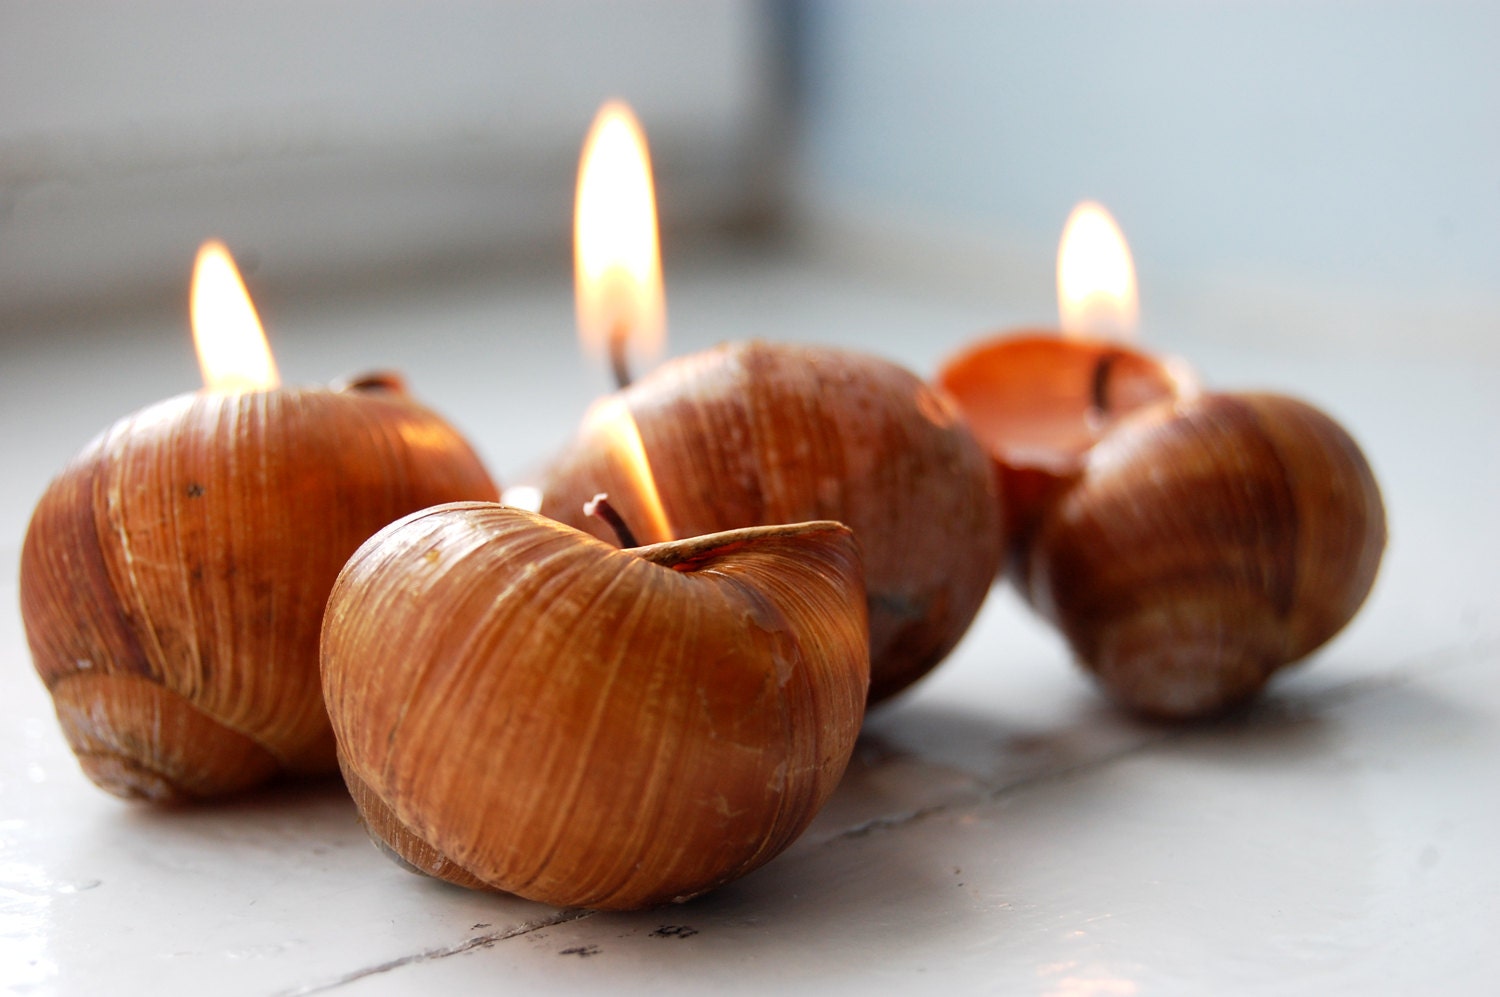 Snails Shell Candle Handmade Eco-friendly Reusable Candle Vanilla Scent - LessCandles